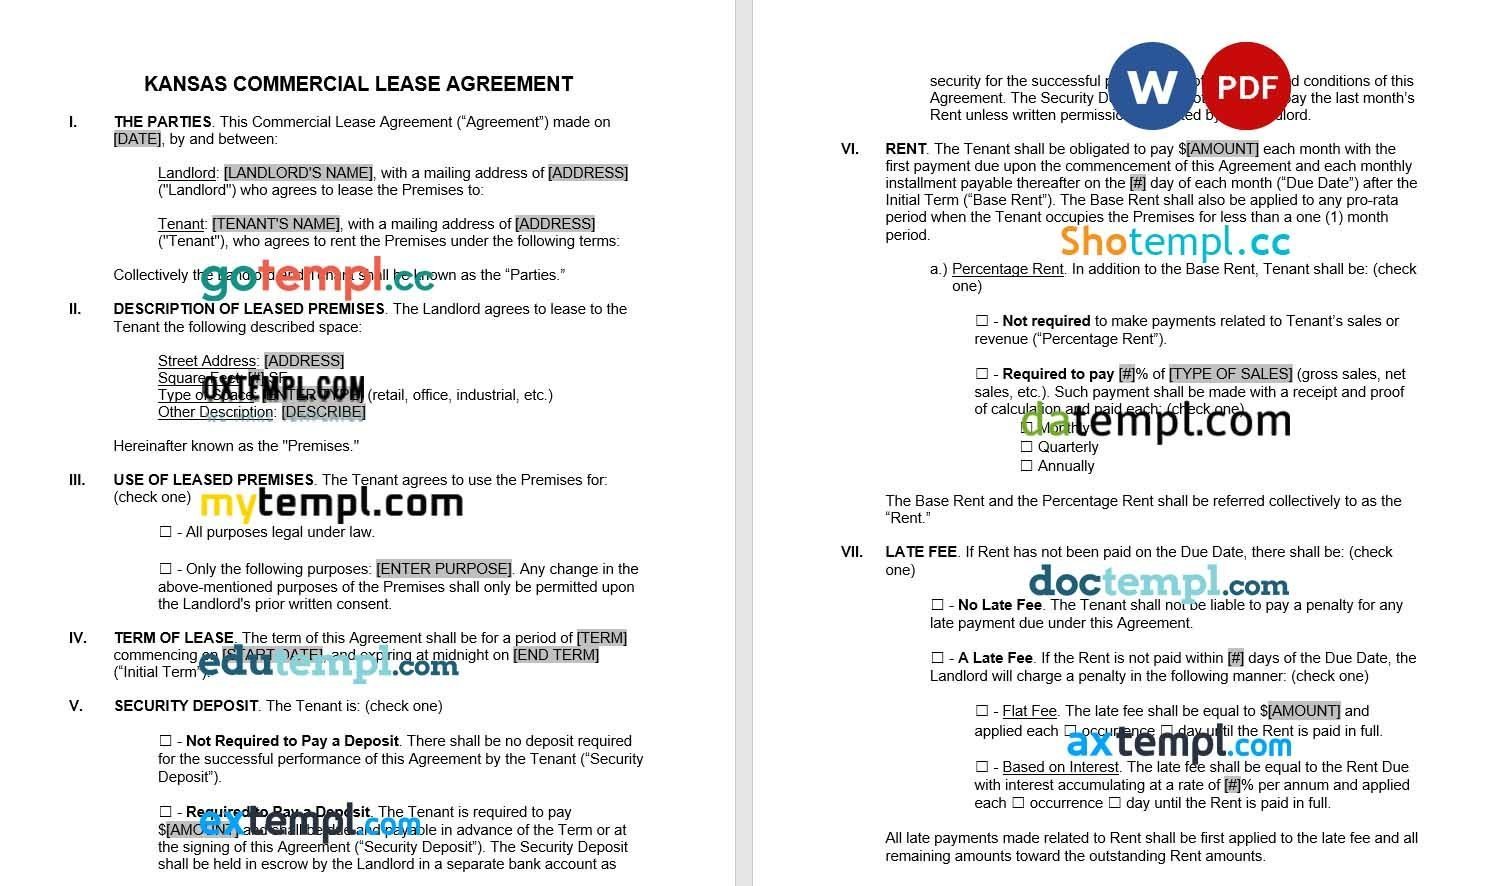 Kansas Commercial Lease Agreement Word example, fully editable